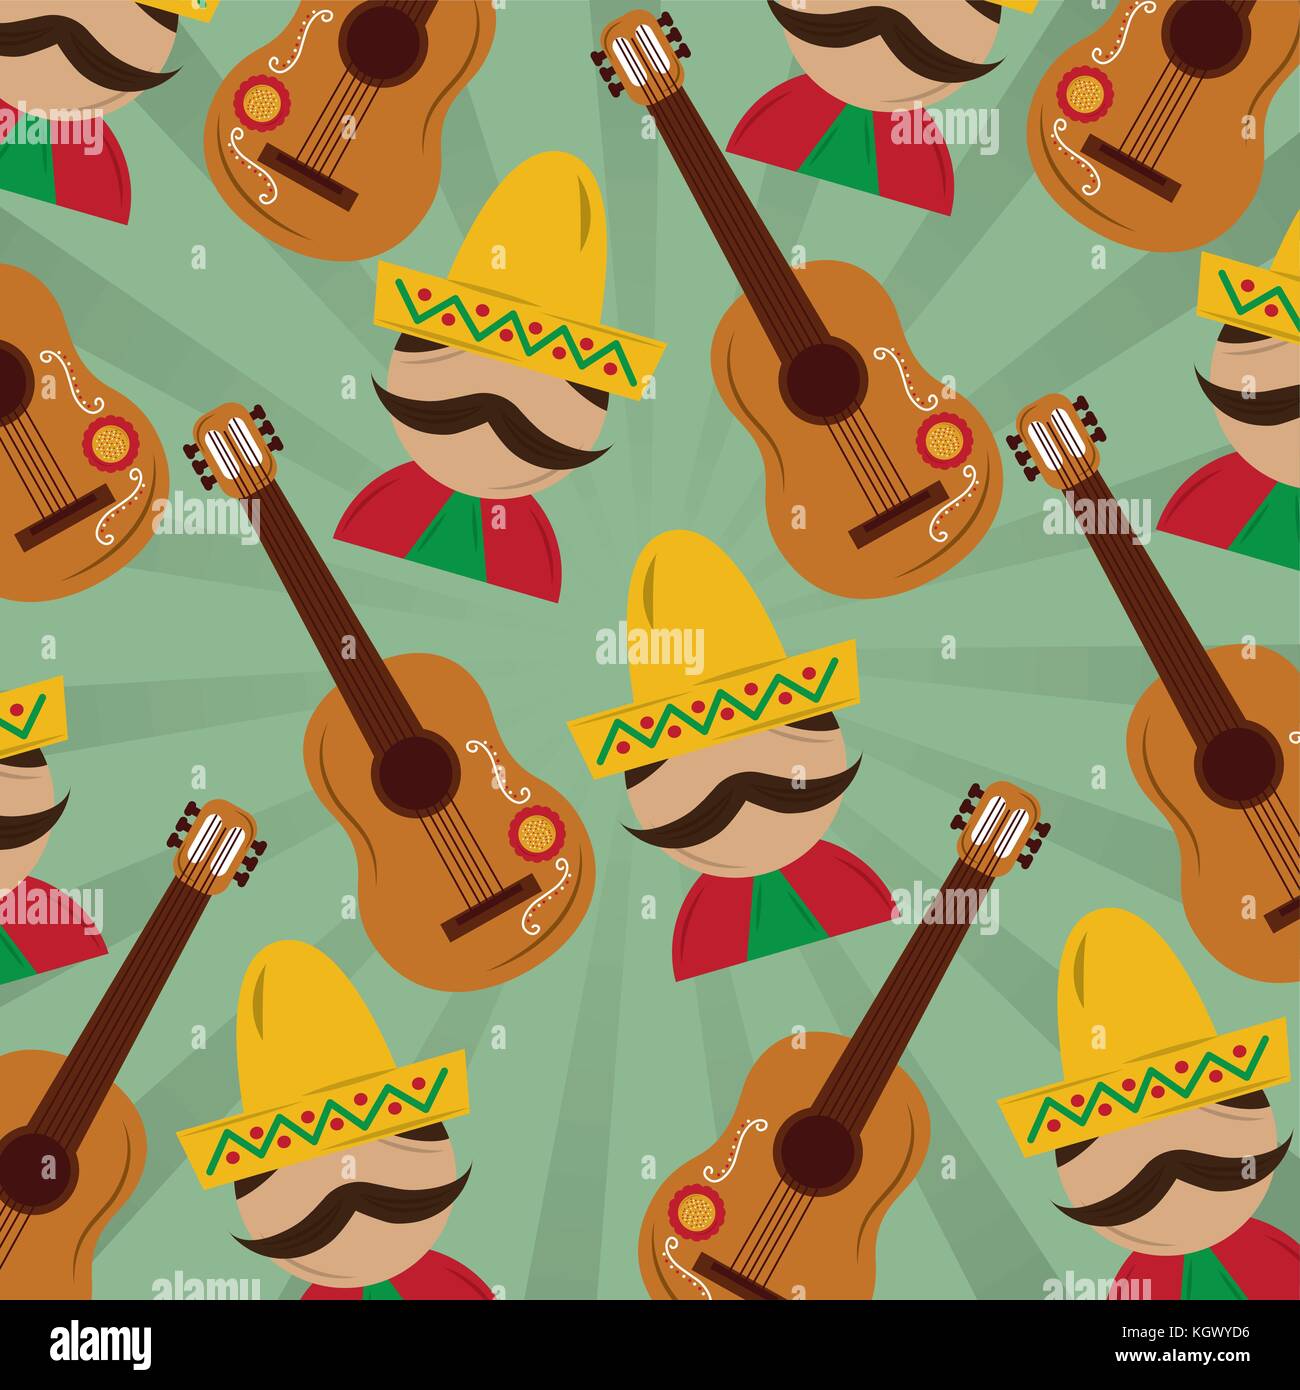 mexican man with hat mustache and guitar pattern image Stock Vector